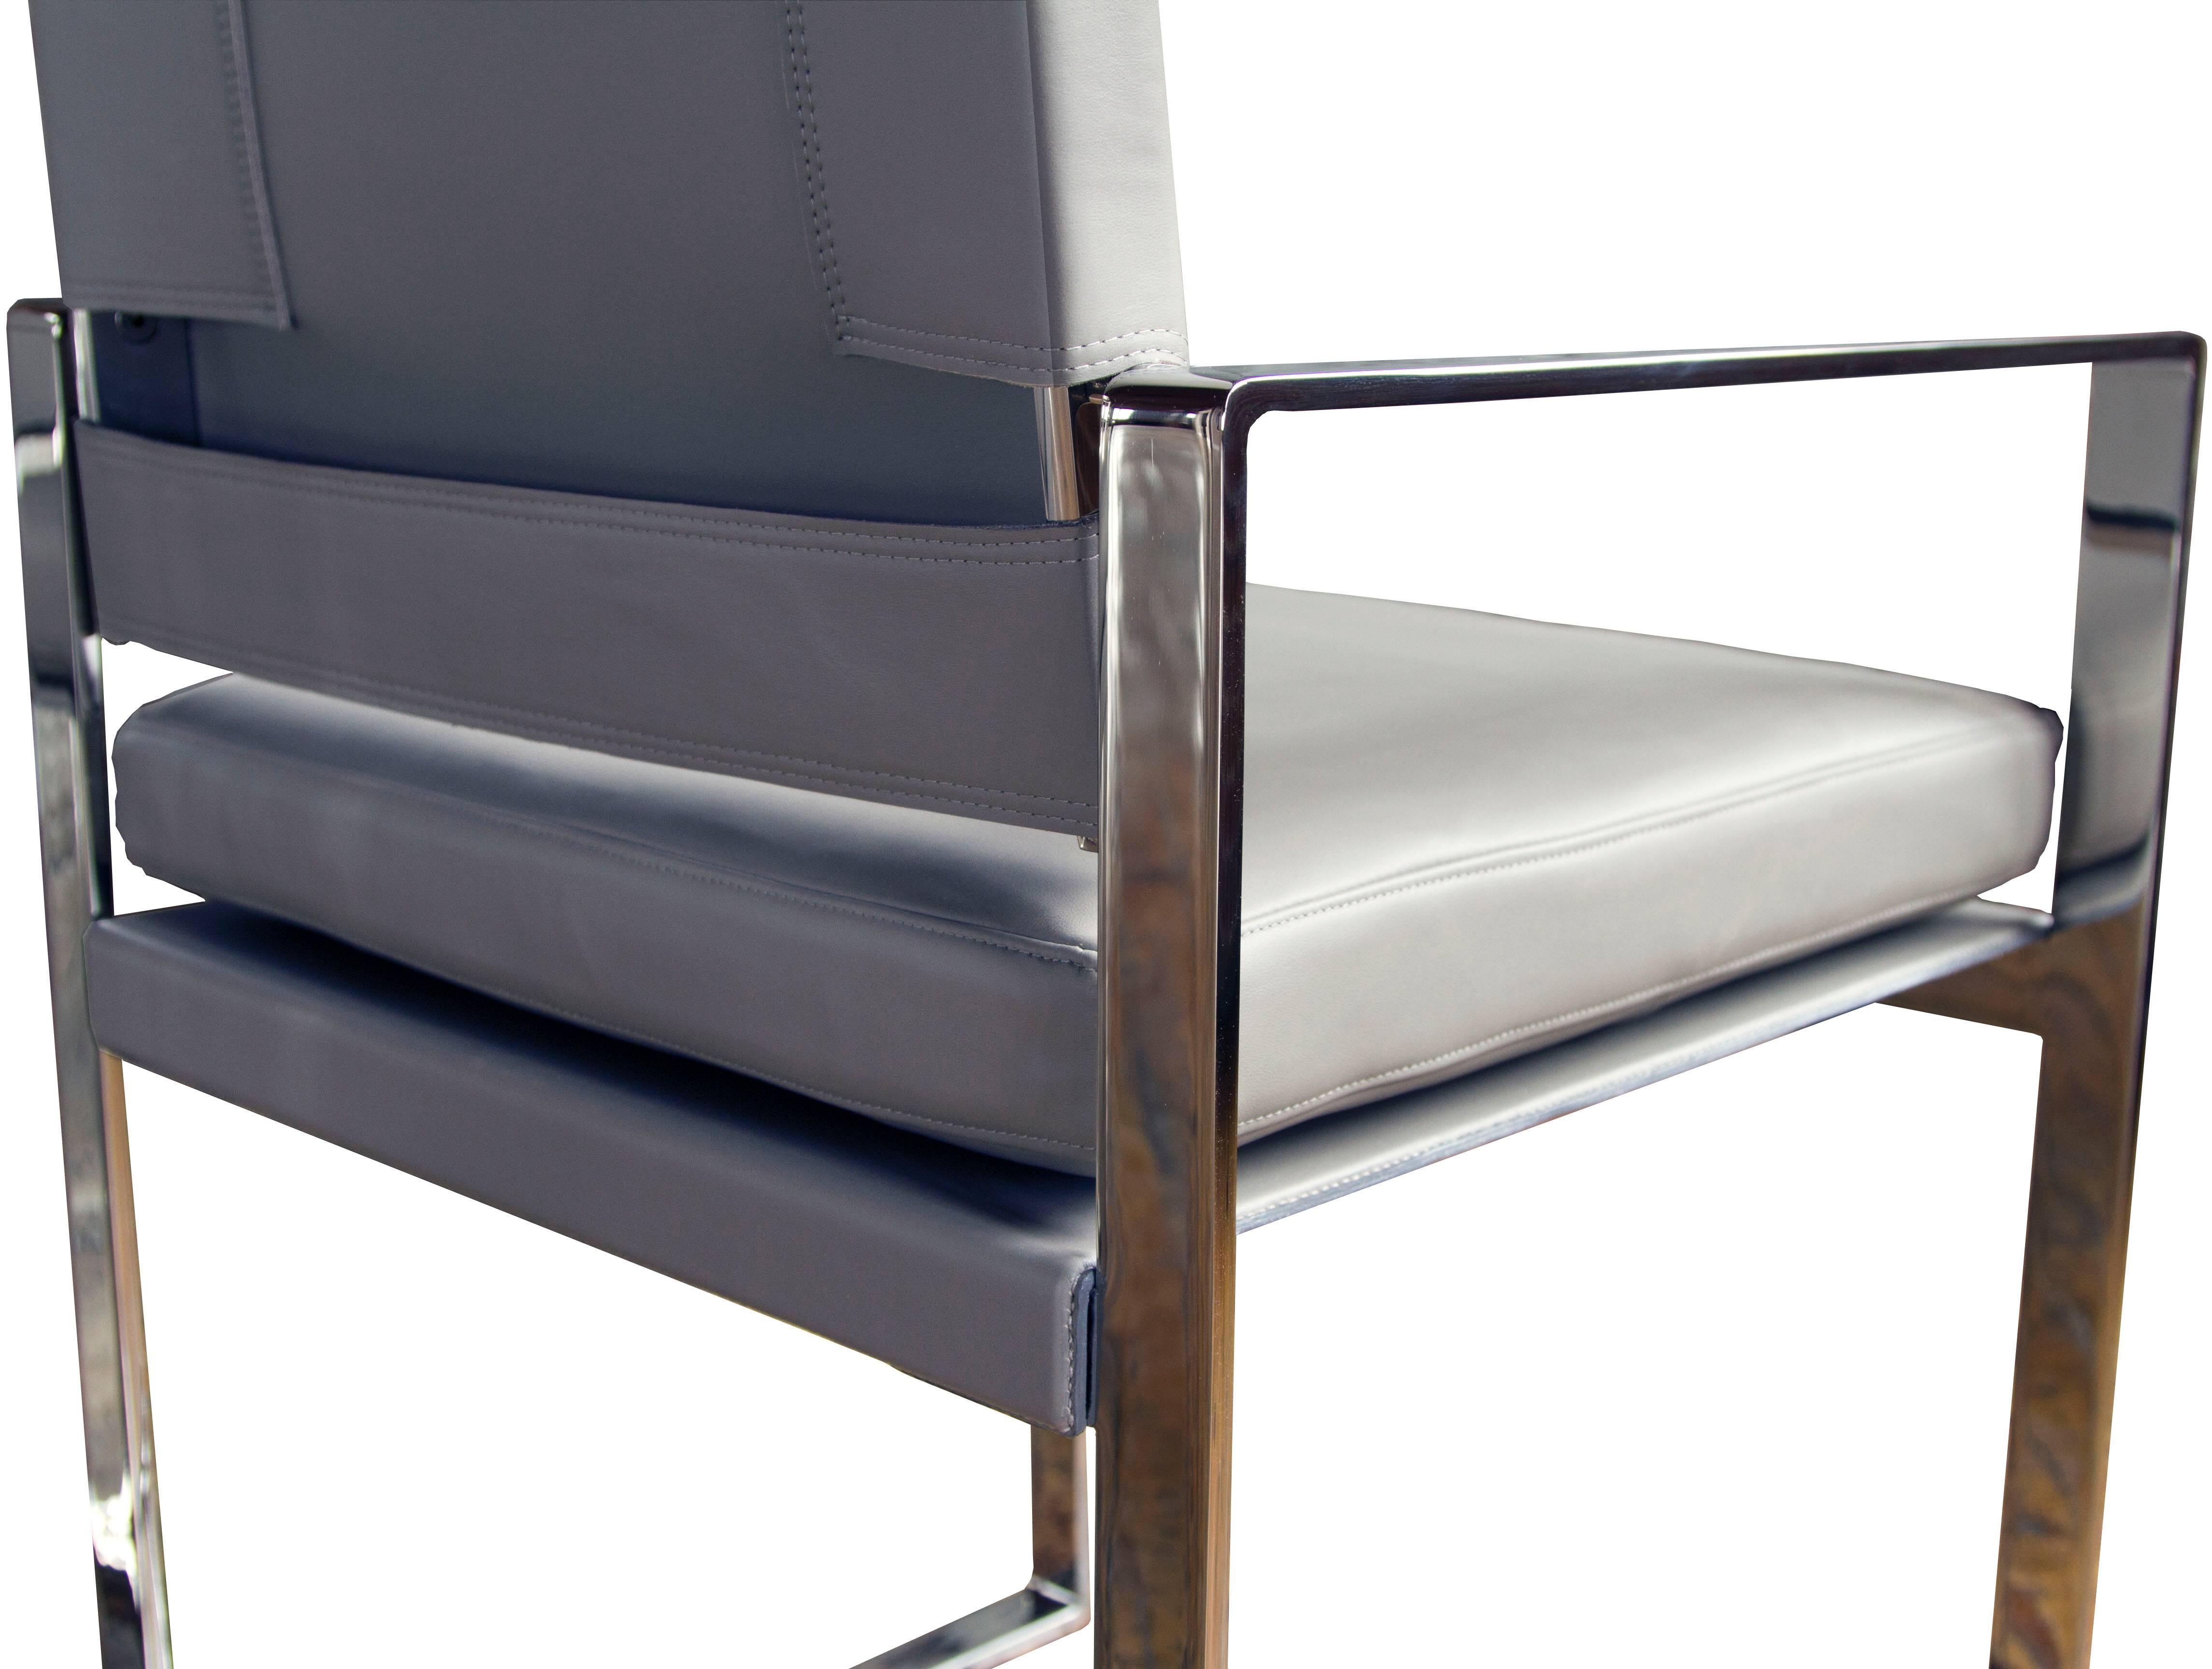 The St. Cloud dining chair in polished stainless steel and Garrett: Flight / Carolina Gull leather upholstery.

The modern campaign collection by Richard Wrightman combines the vernacular of traditional form with a modern aesthetic, mixing memory